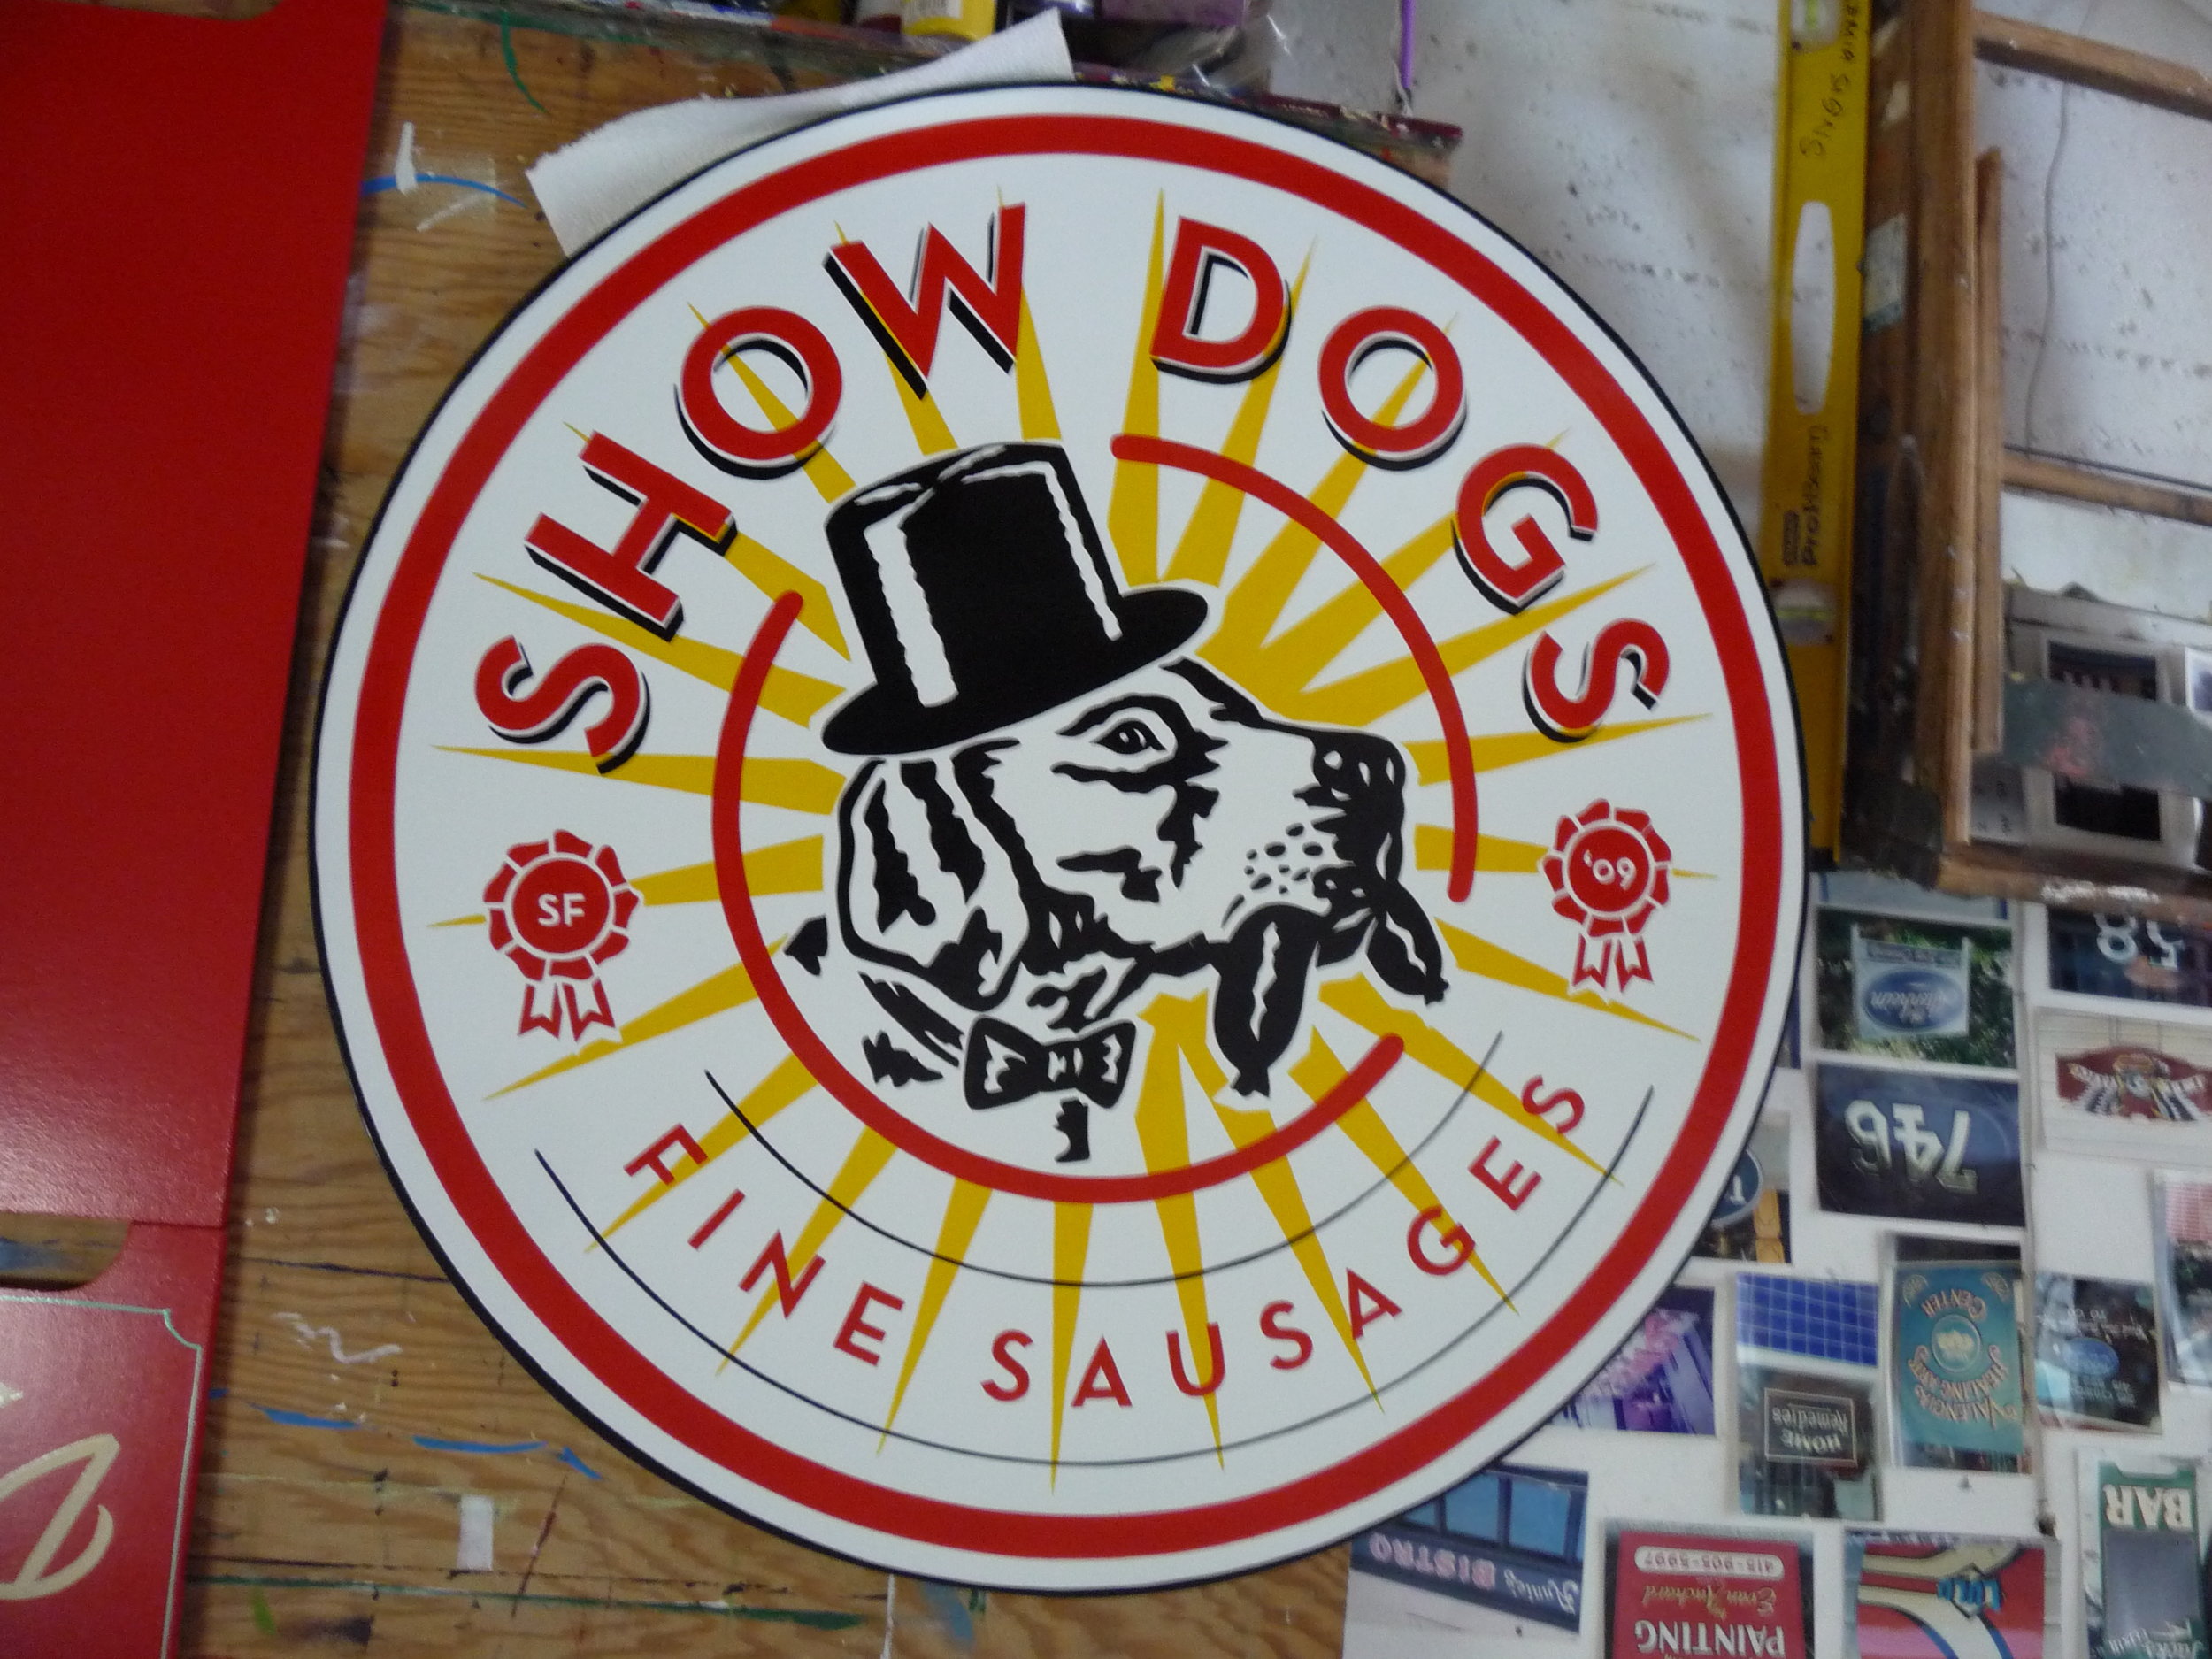 HAND-show-dogs-projecting-sign_4747643886_o.jpg